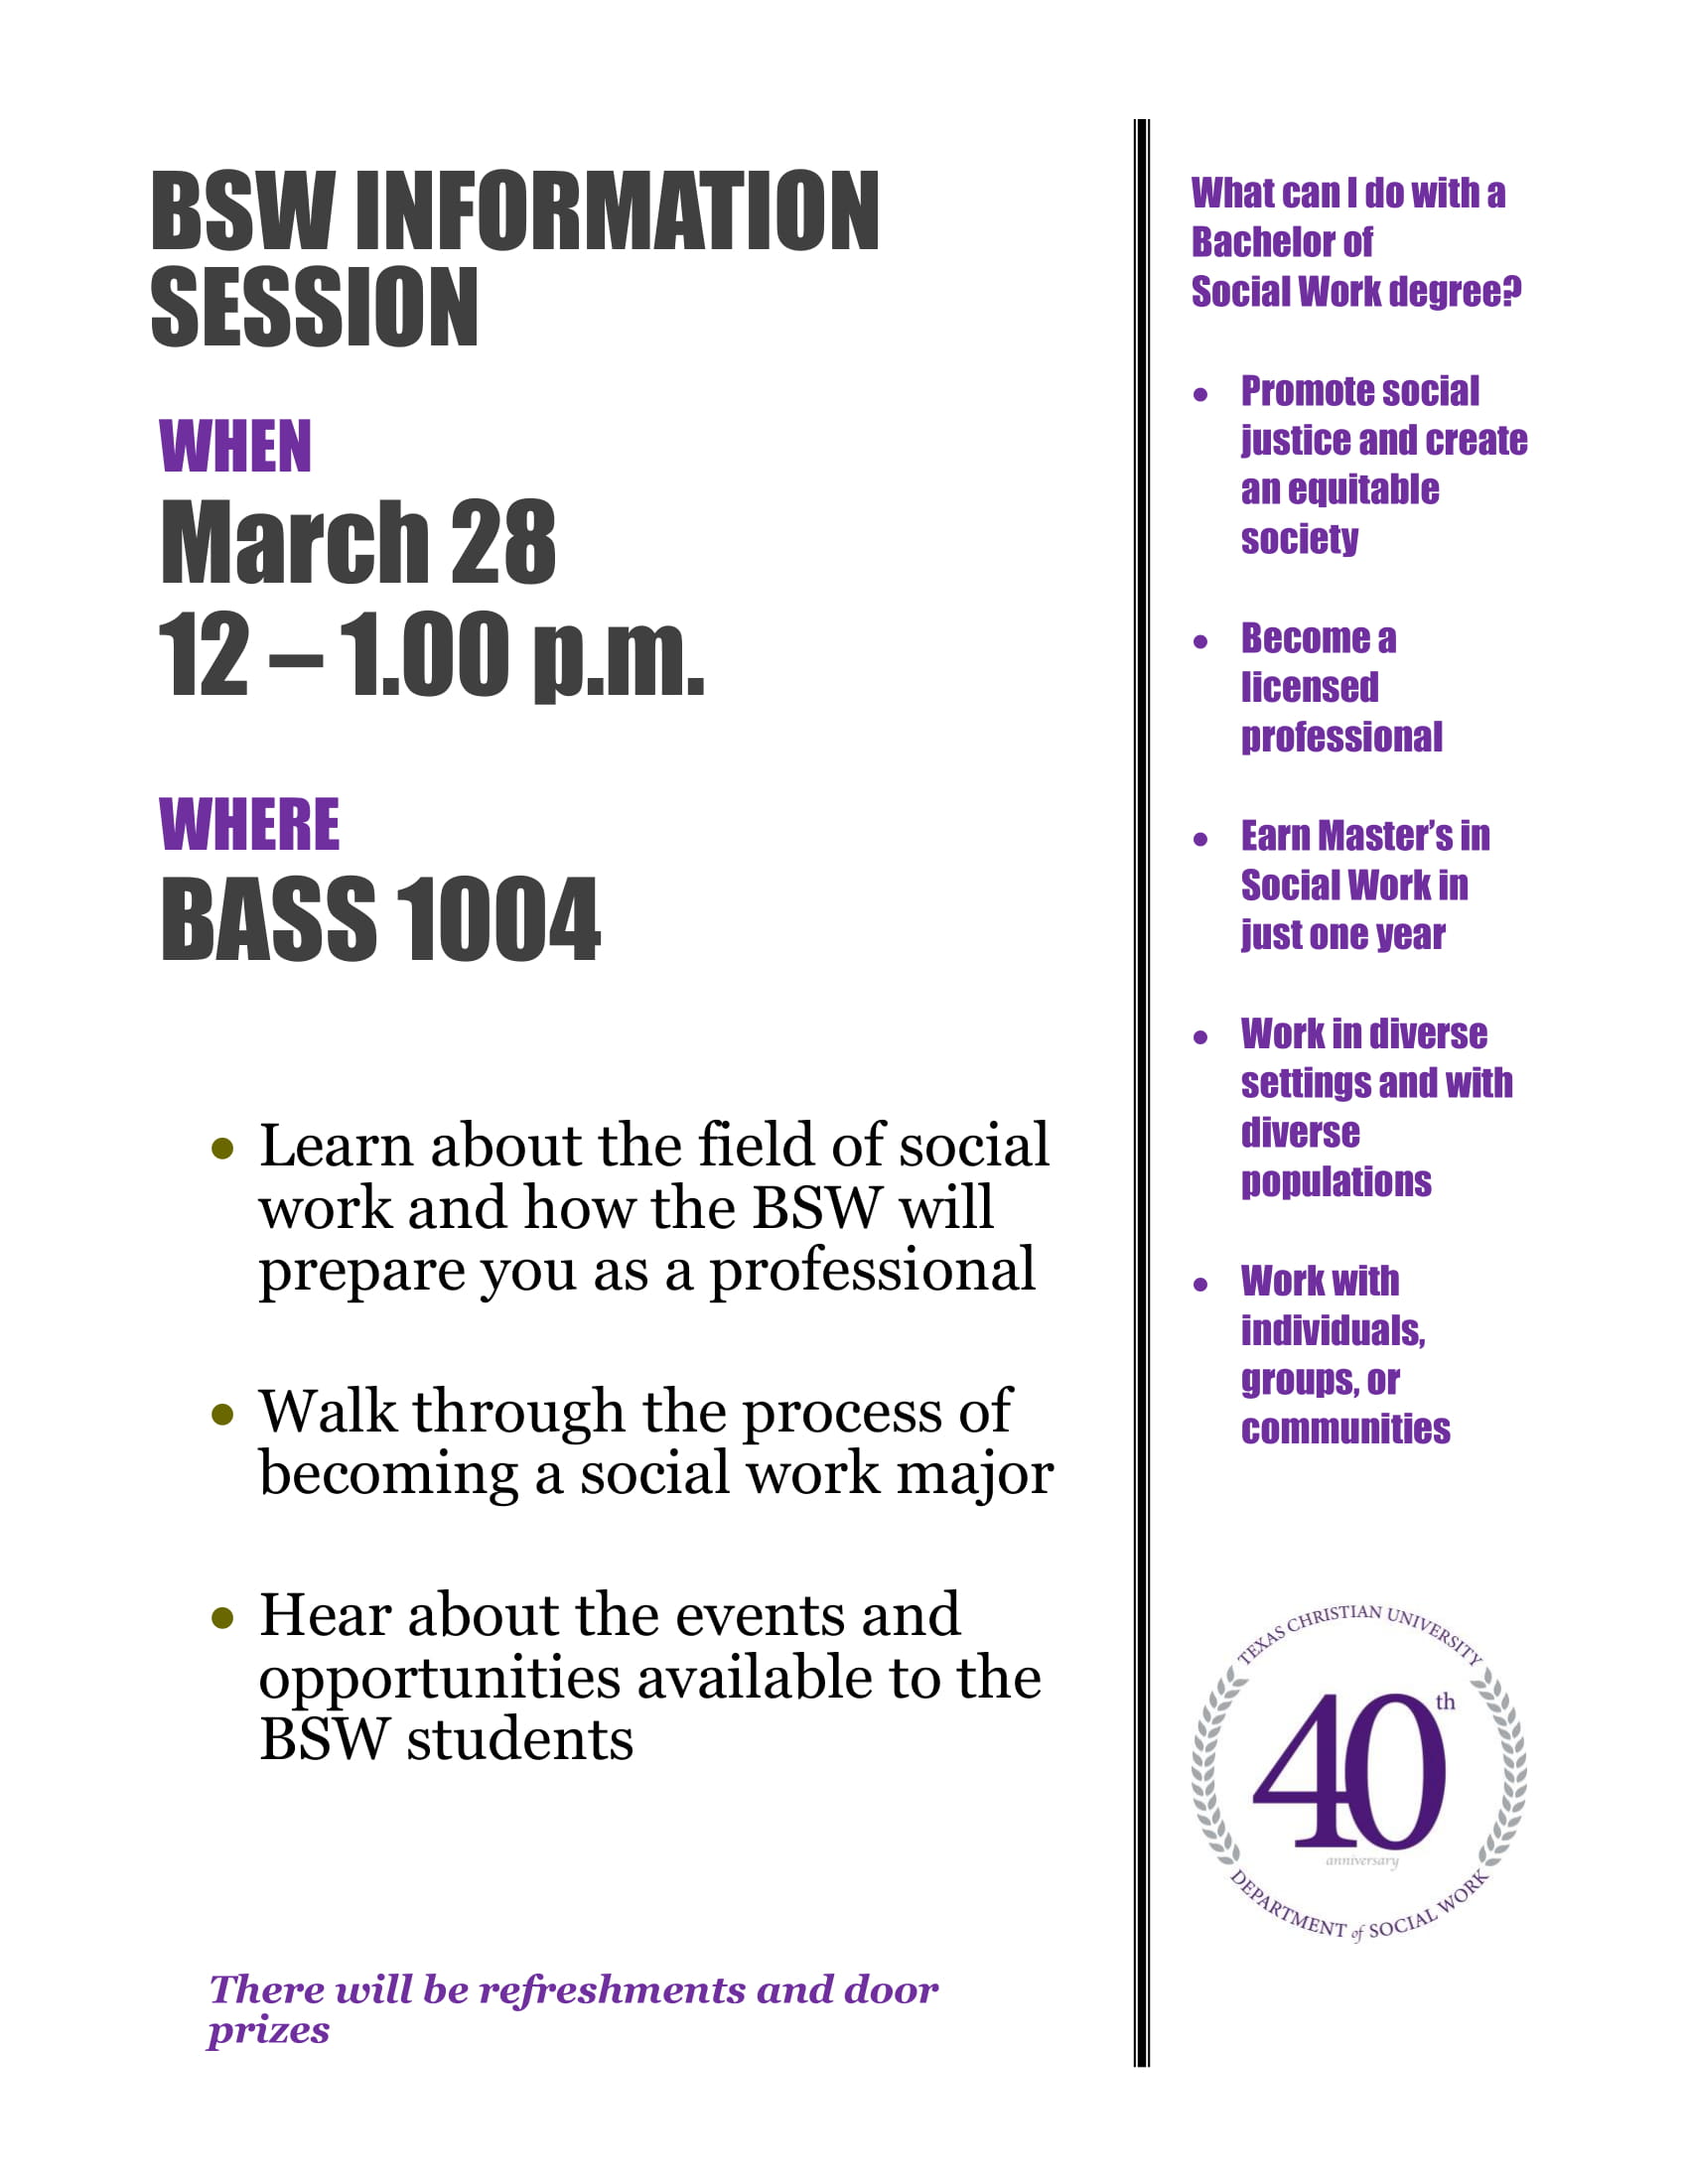 BSW Info session flyer-1